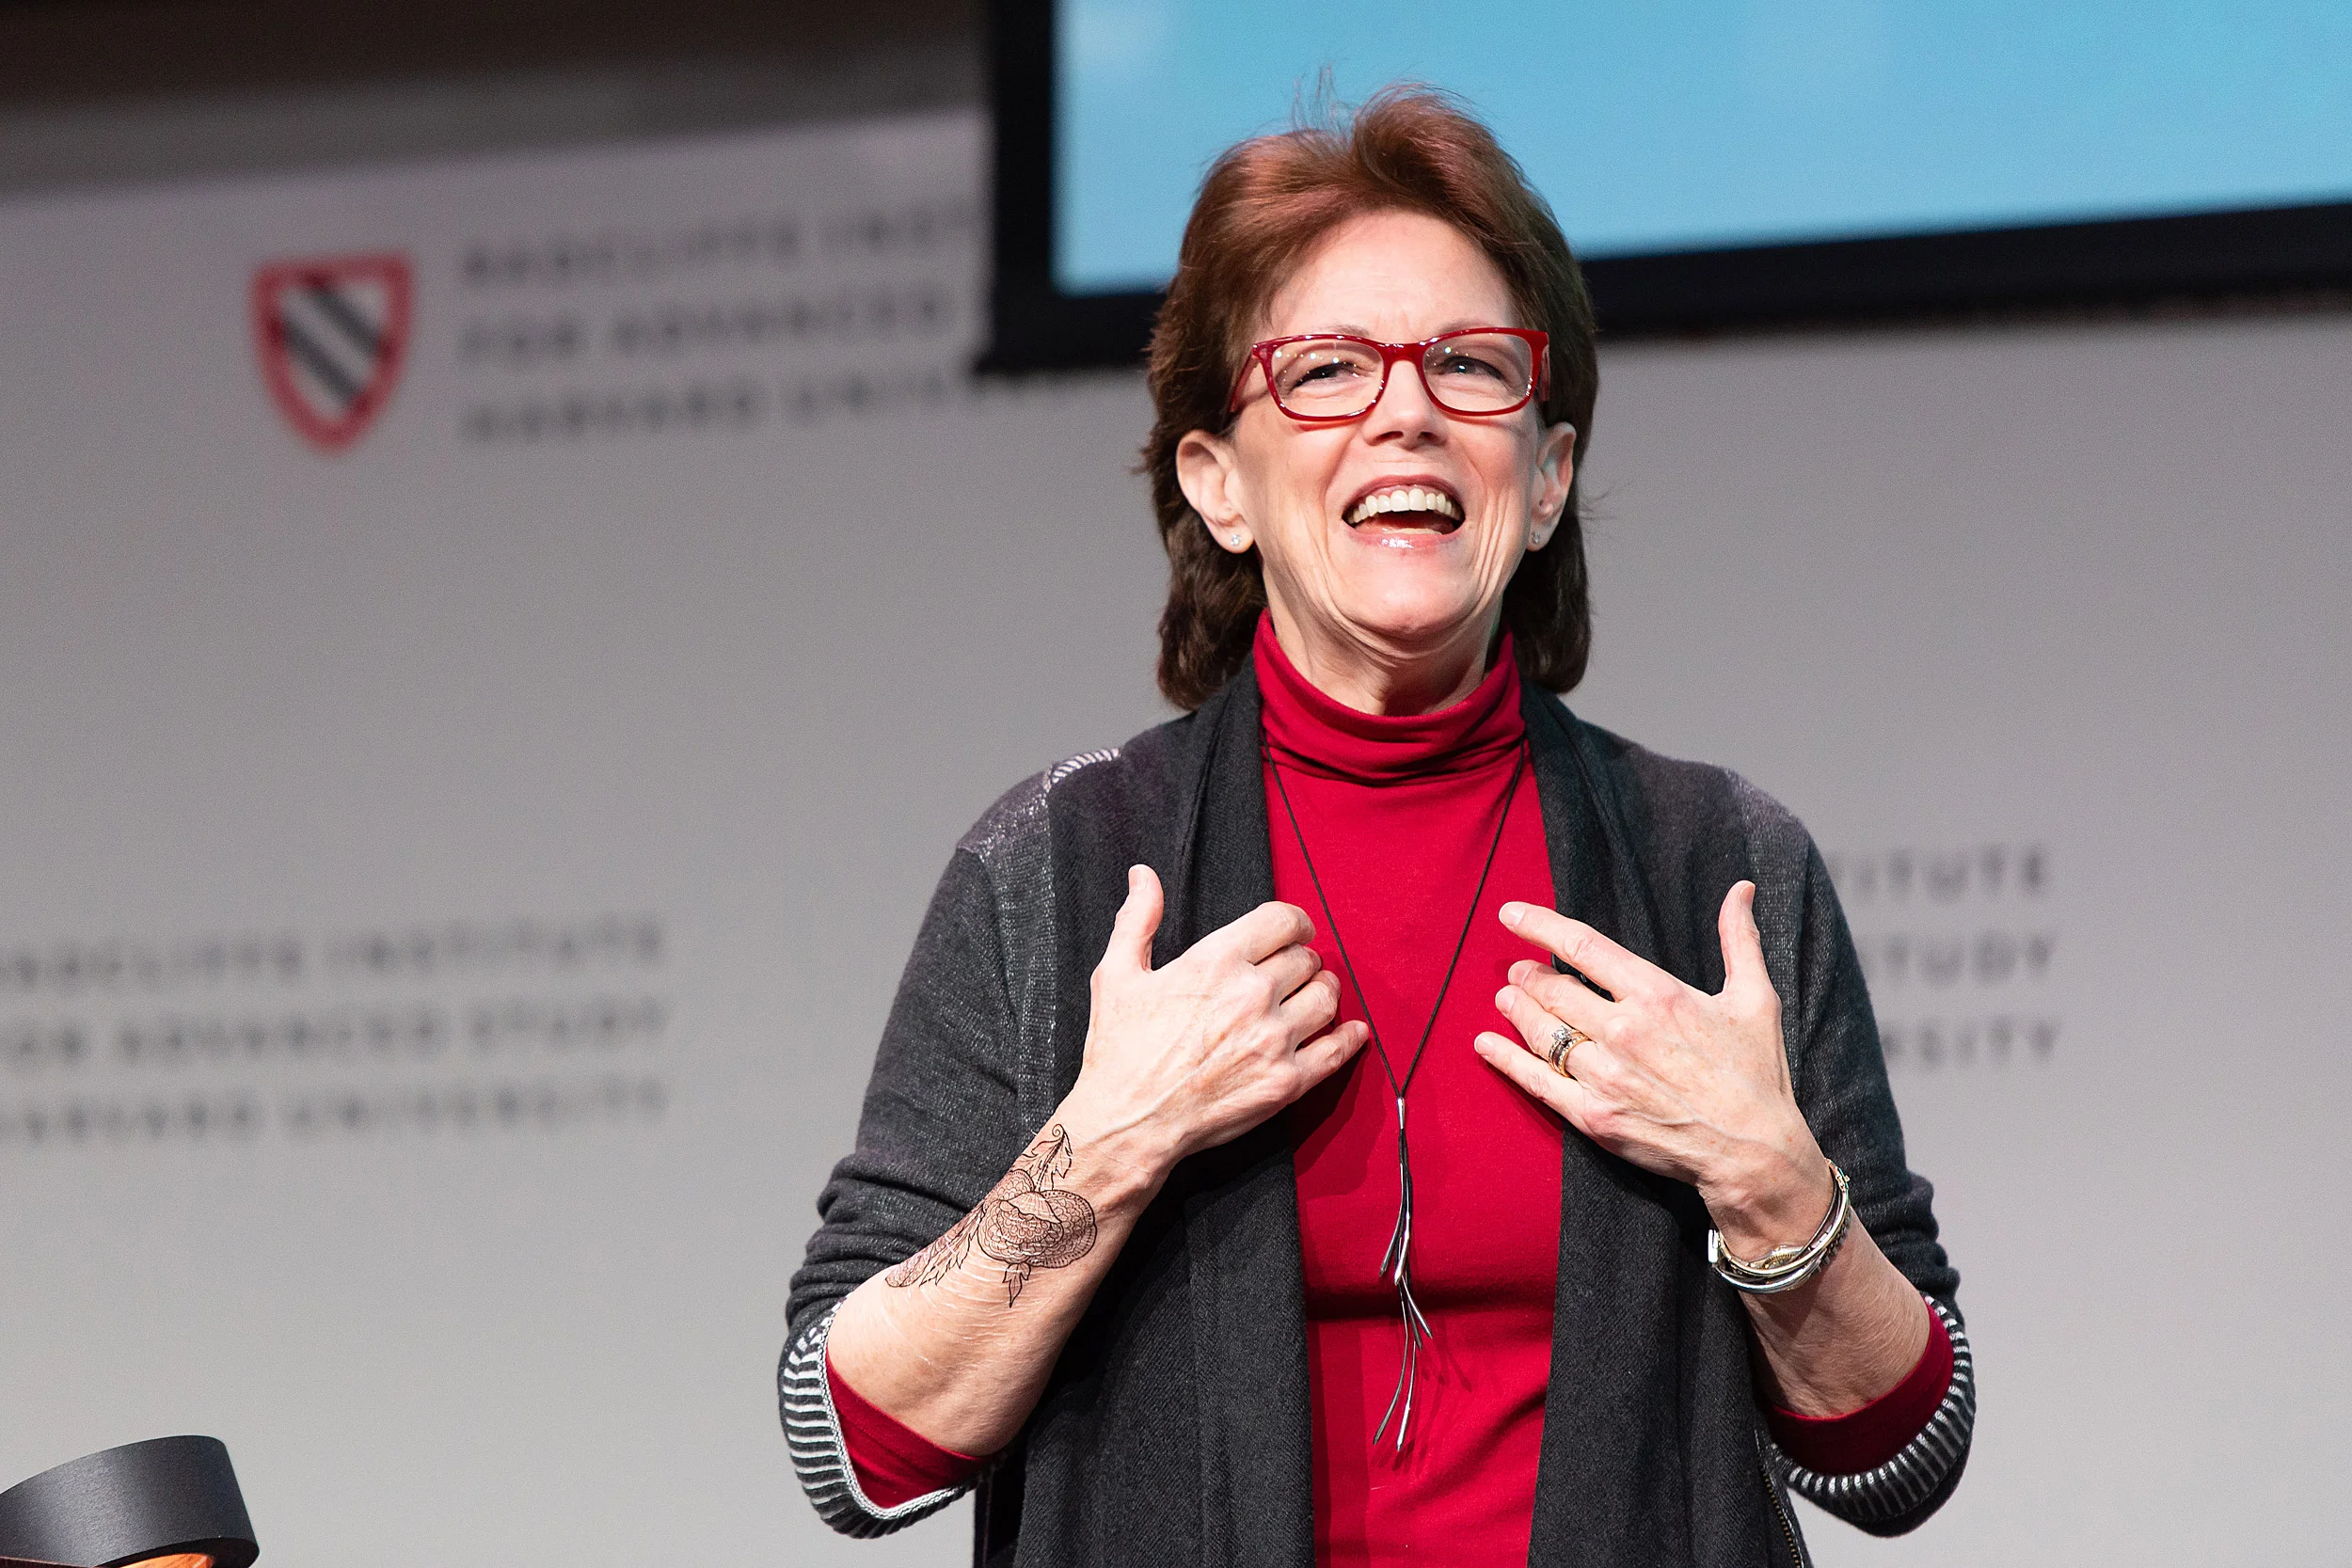 Meet Susan Bennett: The Original Voice Behind Your iPhone's Siri and How She Shaped Digital Assistants